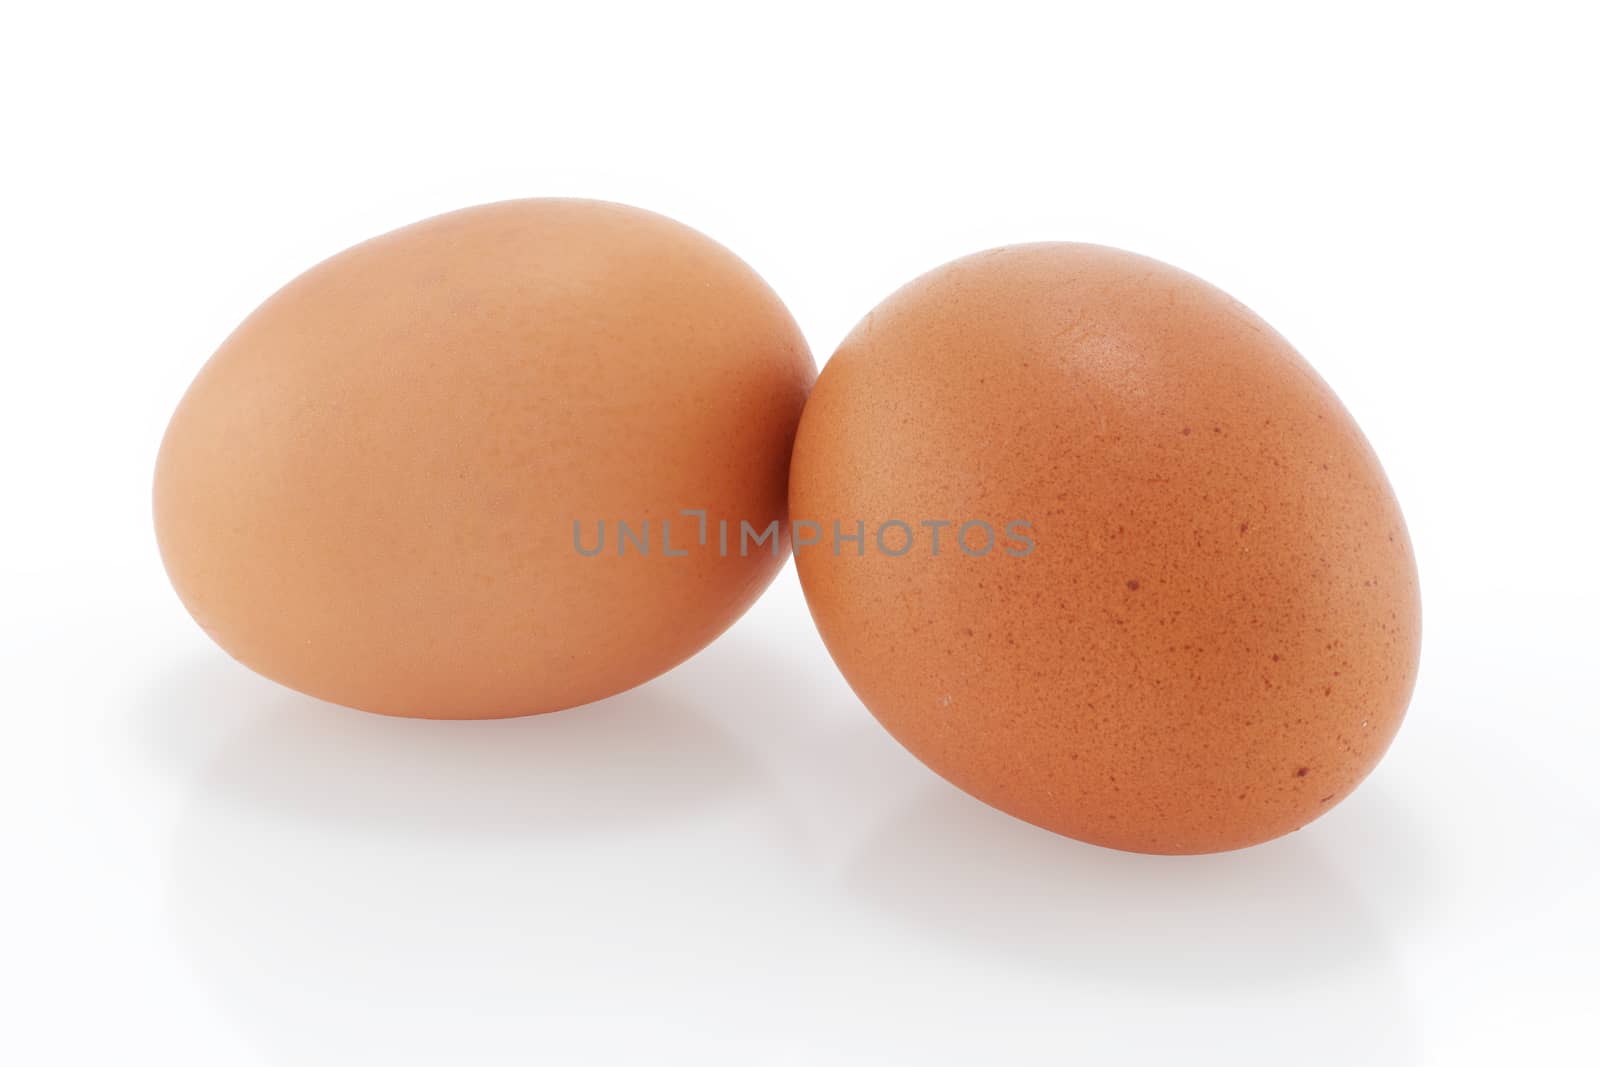 Two brown chicken eggs by VivacityImages